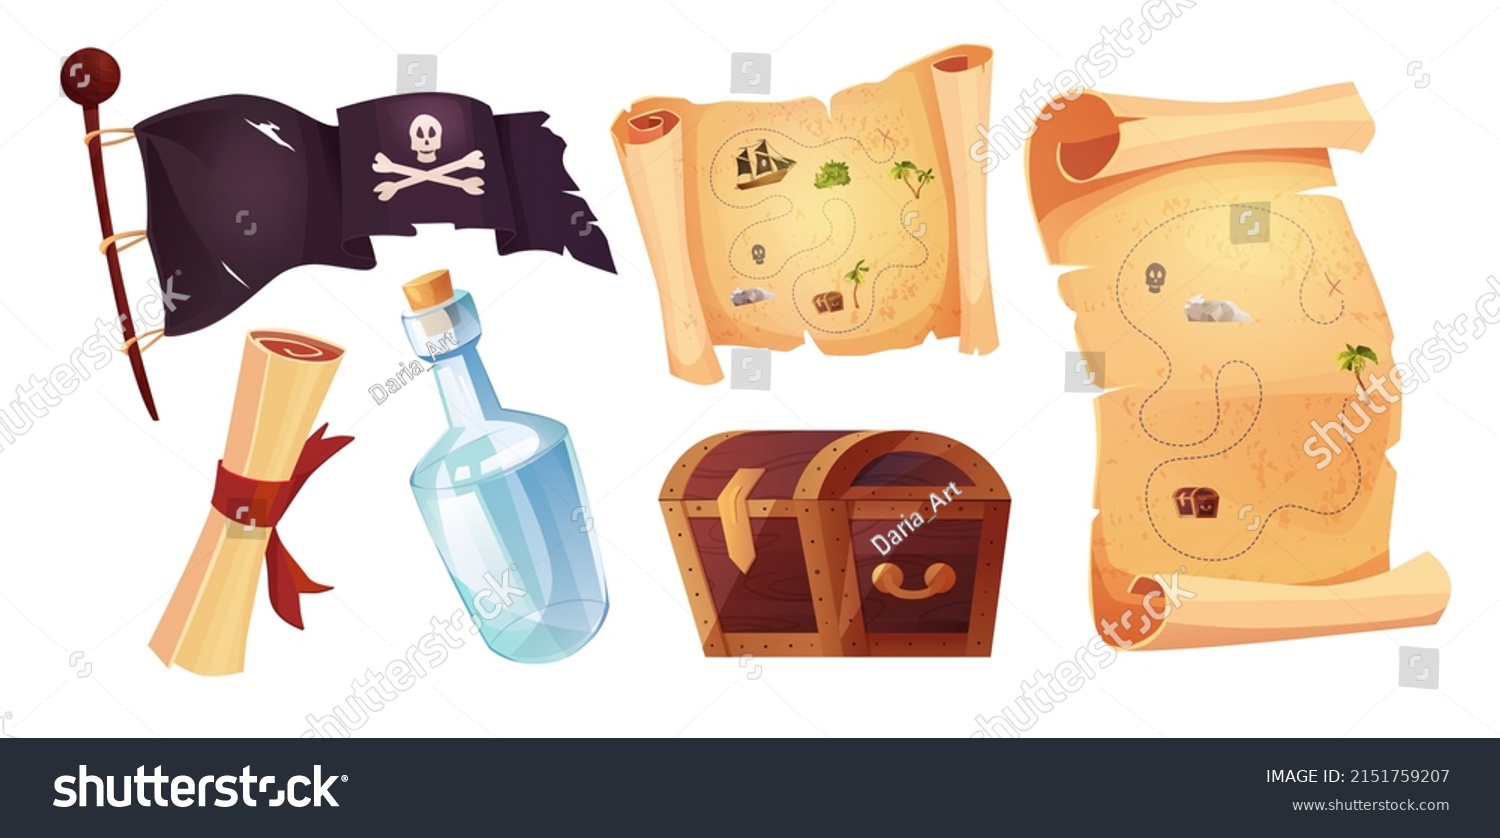 Pirates set icons in cartoon style. Flag with white skull and crossing bones. Waving black flag. Ancient parchment pirate's treasure map, bottle, paper with vintage texture. Chest.  #2151759207